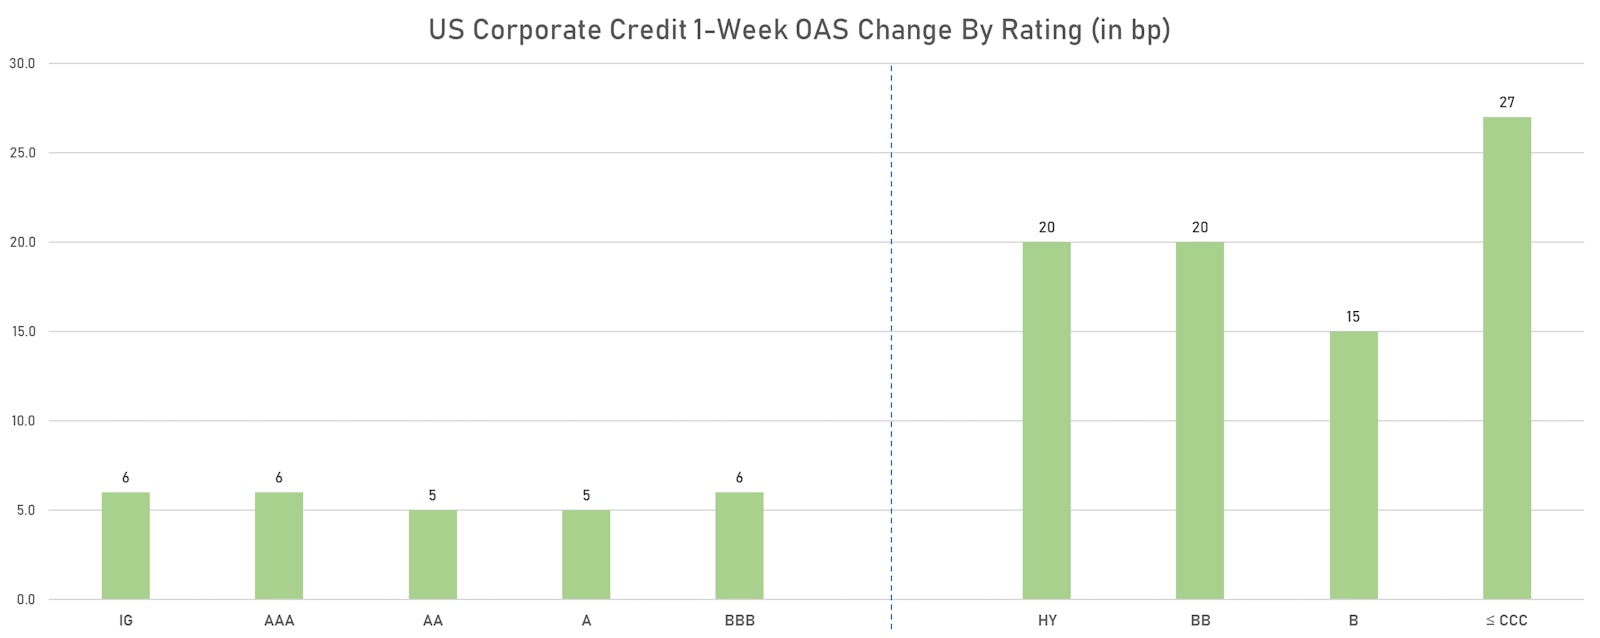 1-Week Change In ICE BofAML US Corporate OAS By Rating | Sources: ϕpost, Refinitiv data